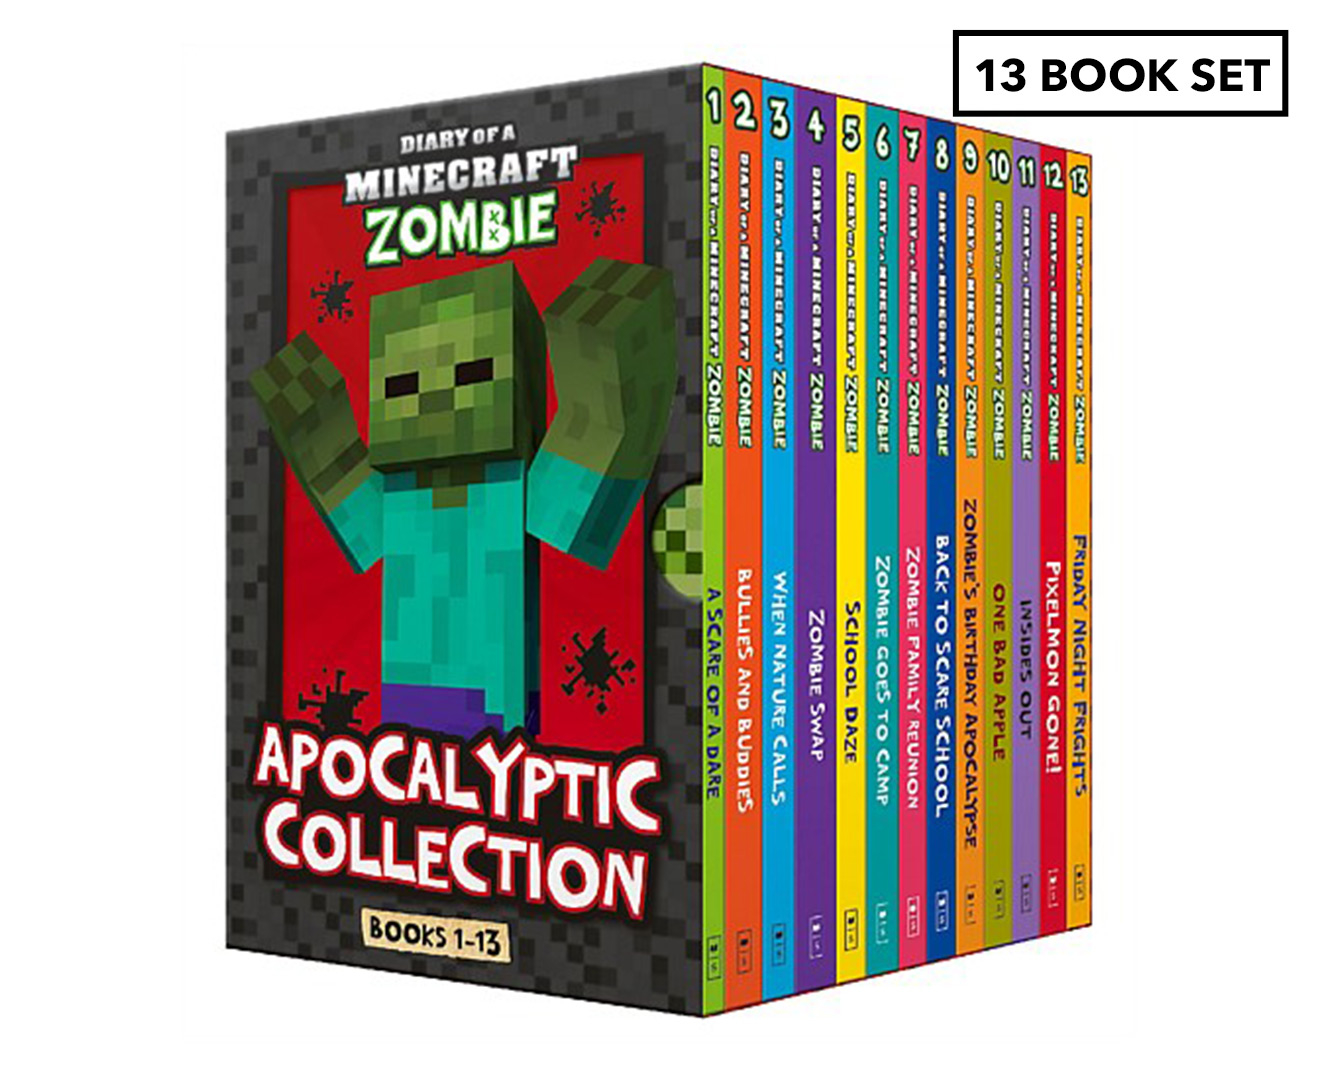 Diary of a Minecraft Zombie Apocalyptic Collection 13Book Set by Zack